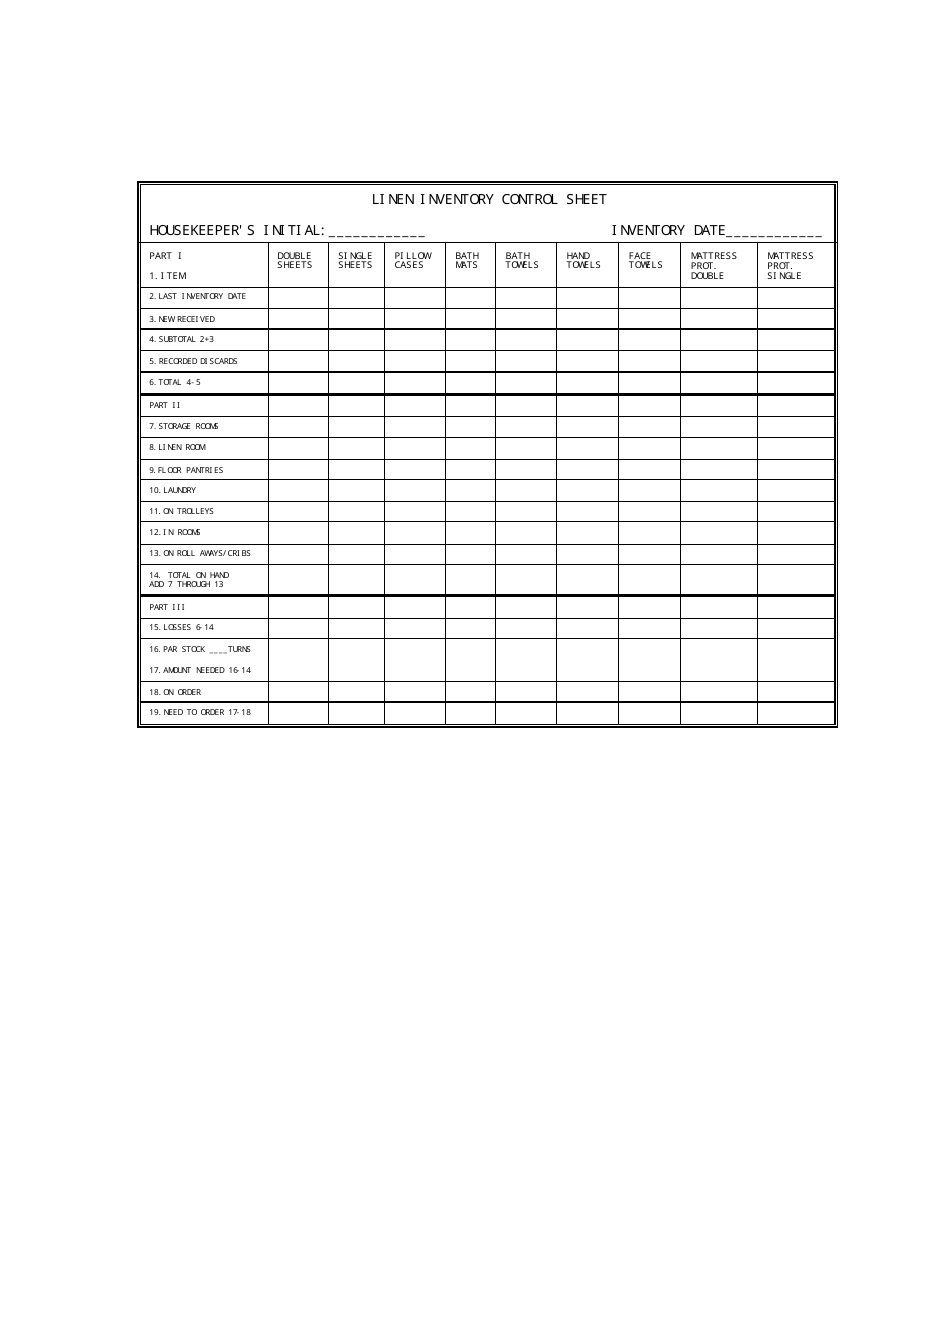 Linen Inventory Control Sheet Template - Effective and organized linen management tool. Keep track of linen items, quantities, allocations, and addition/format changes.